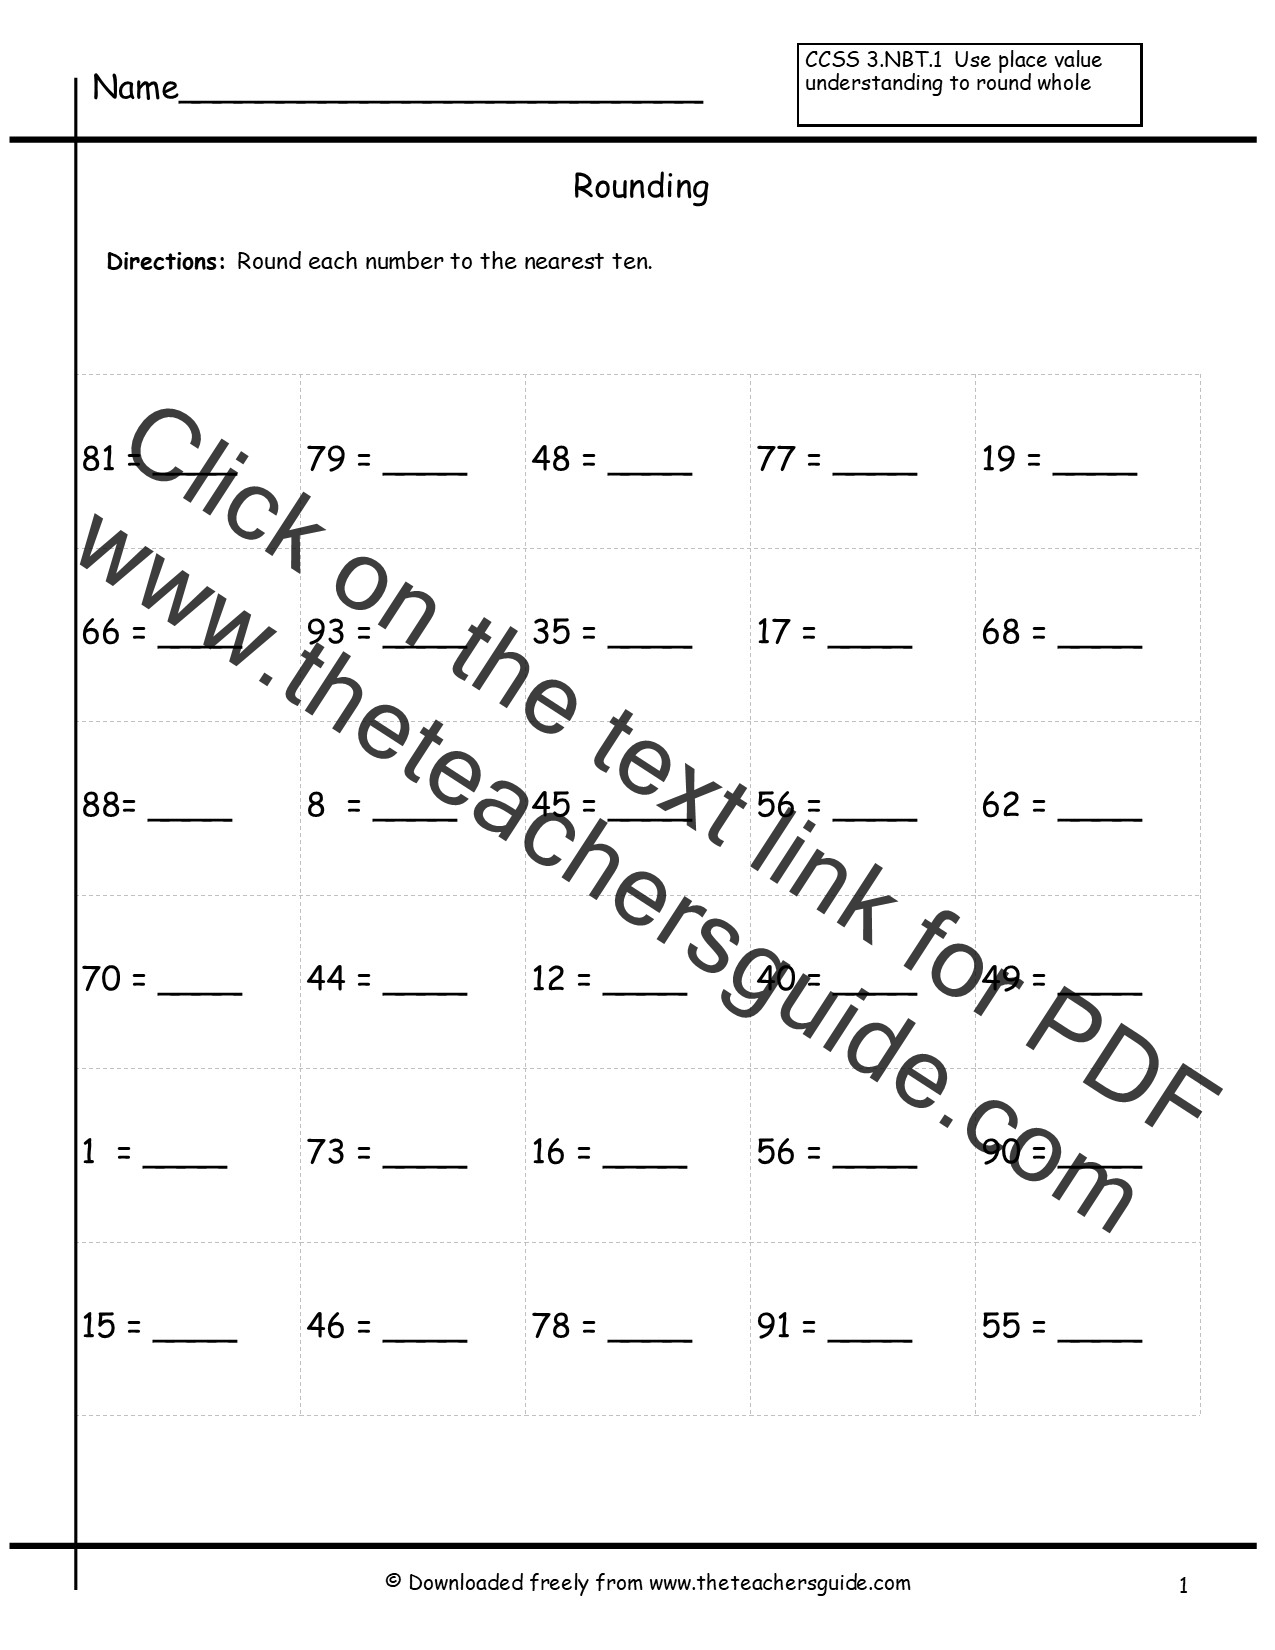 rounding-numbers-worksheets-to-the-nearest-100